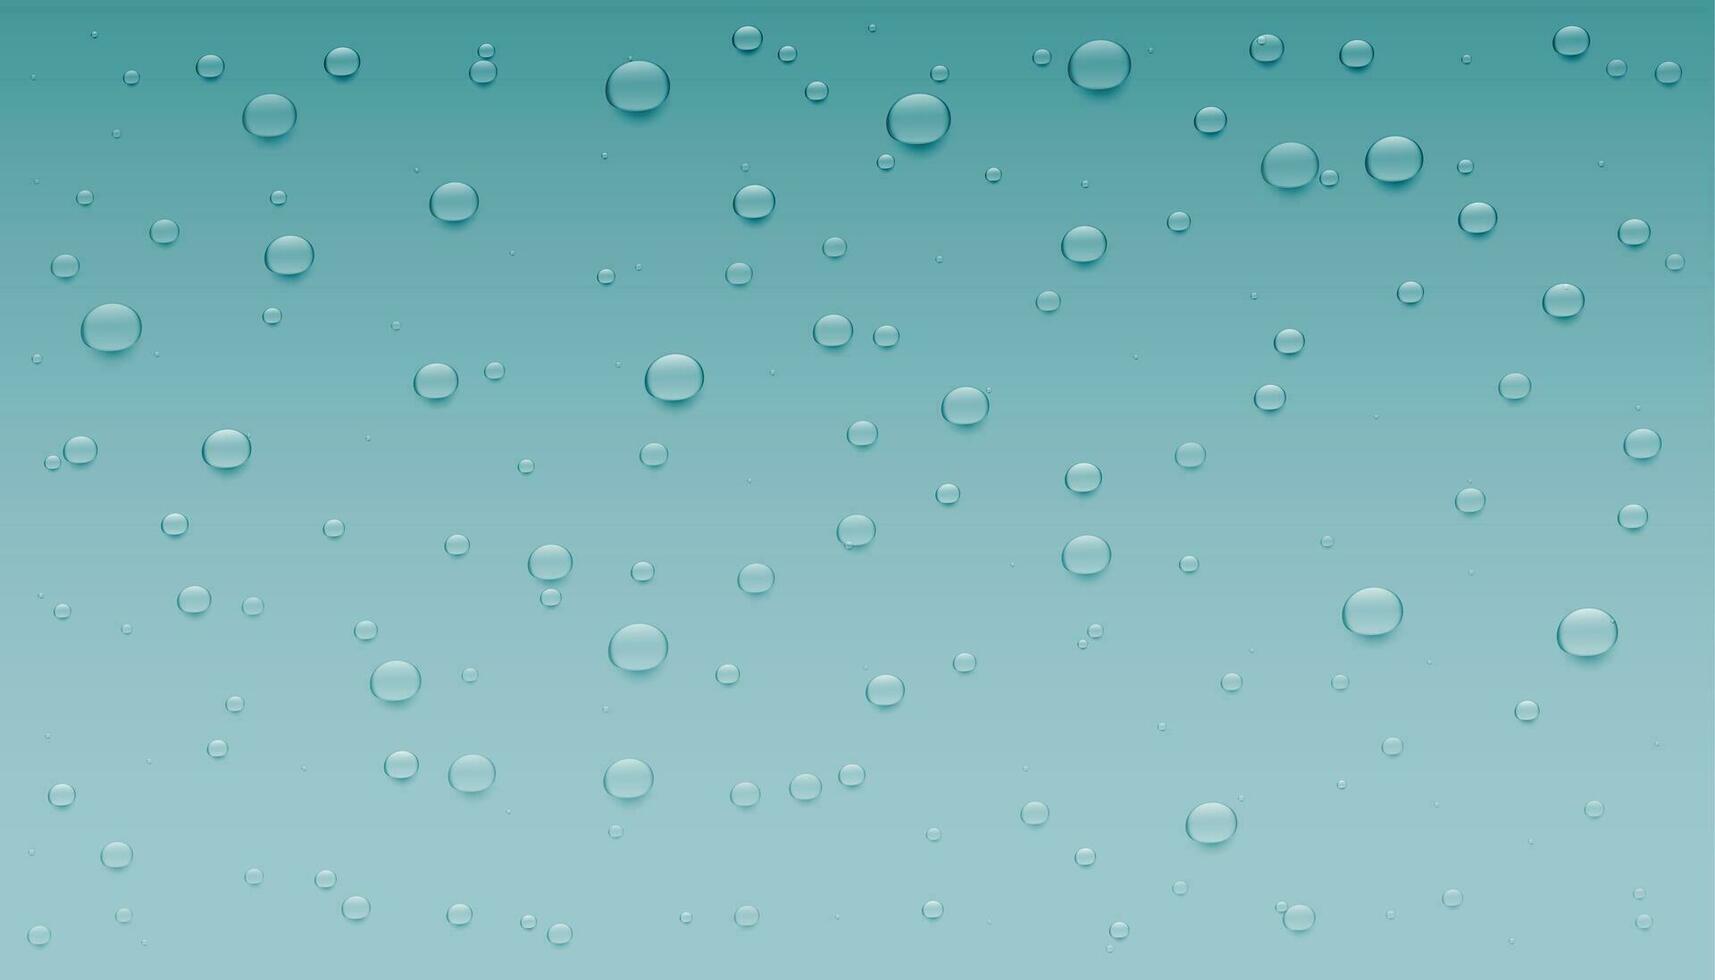 humid mist water droplets background vector